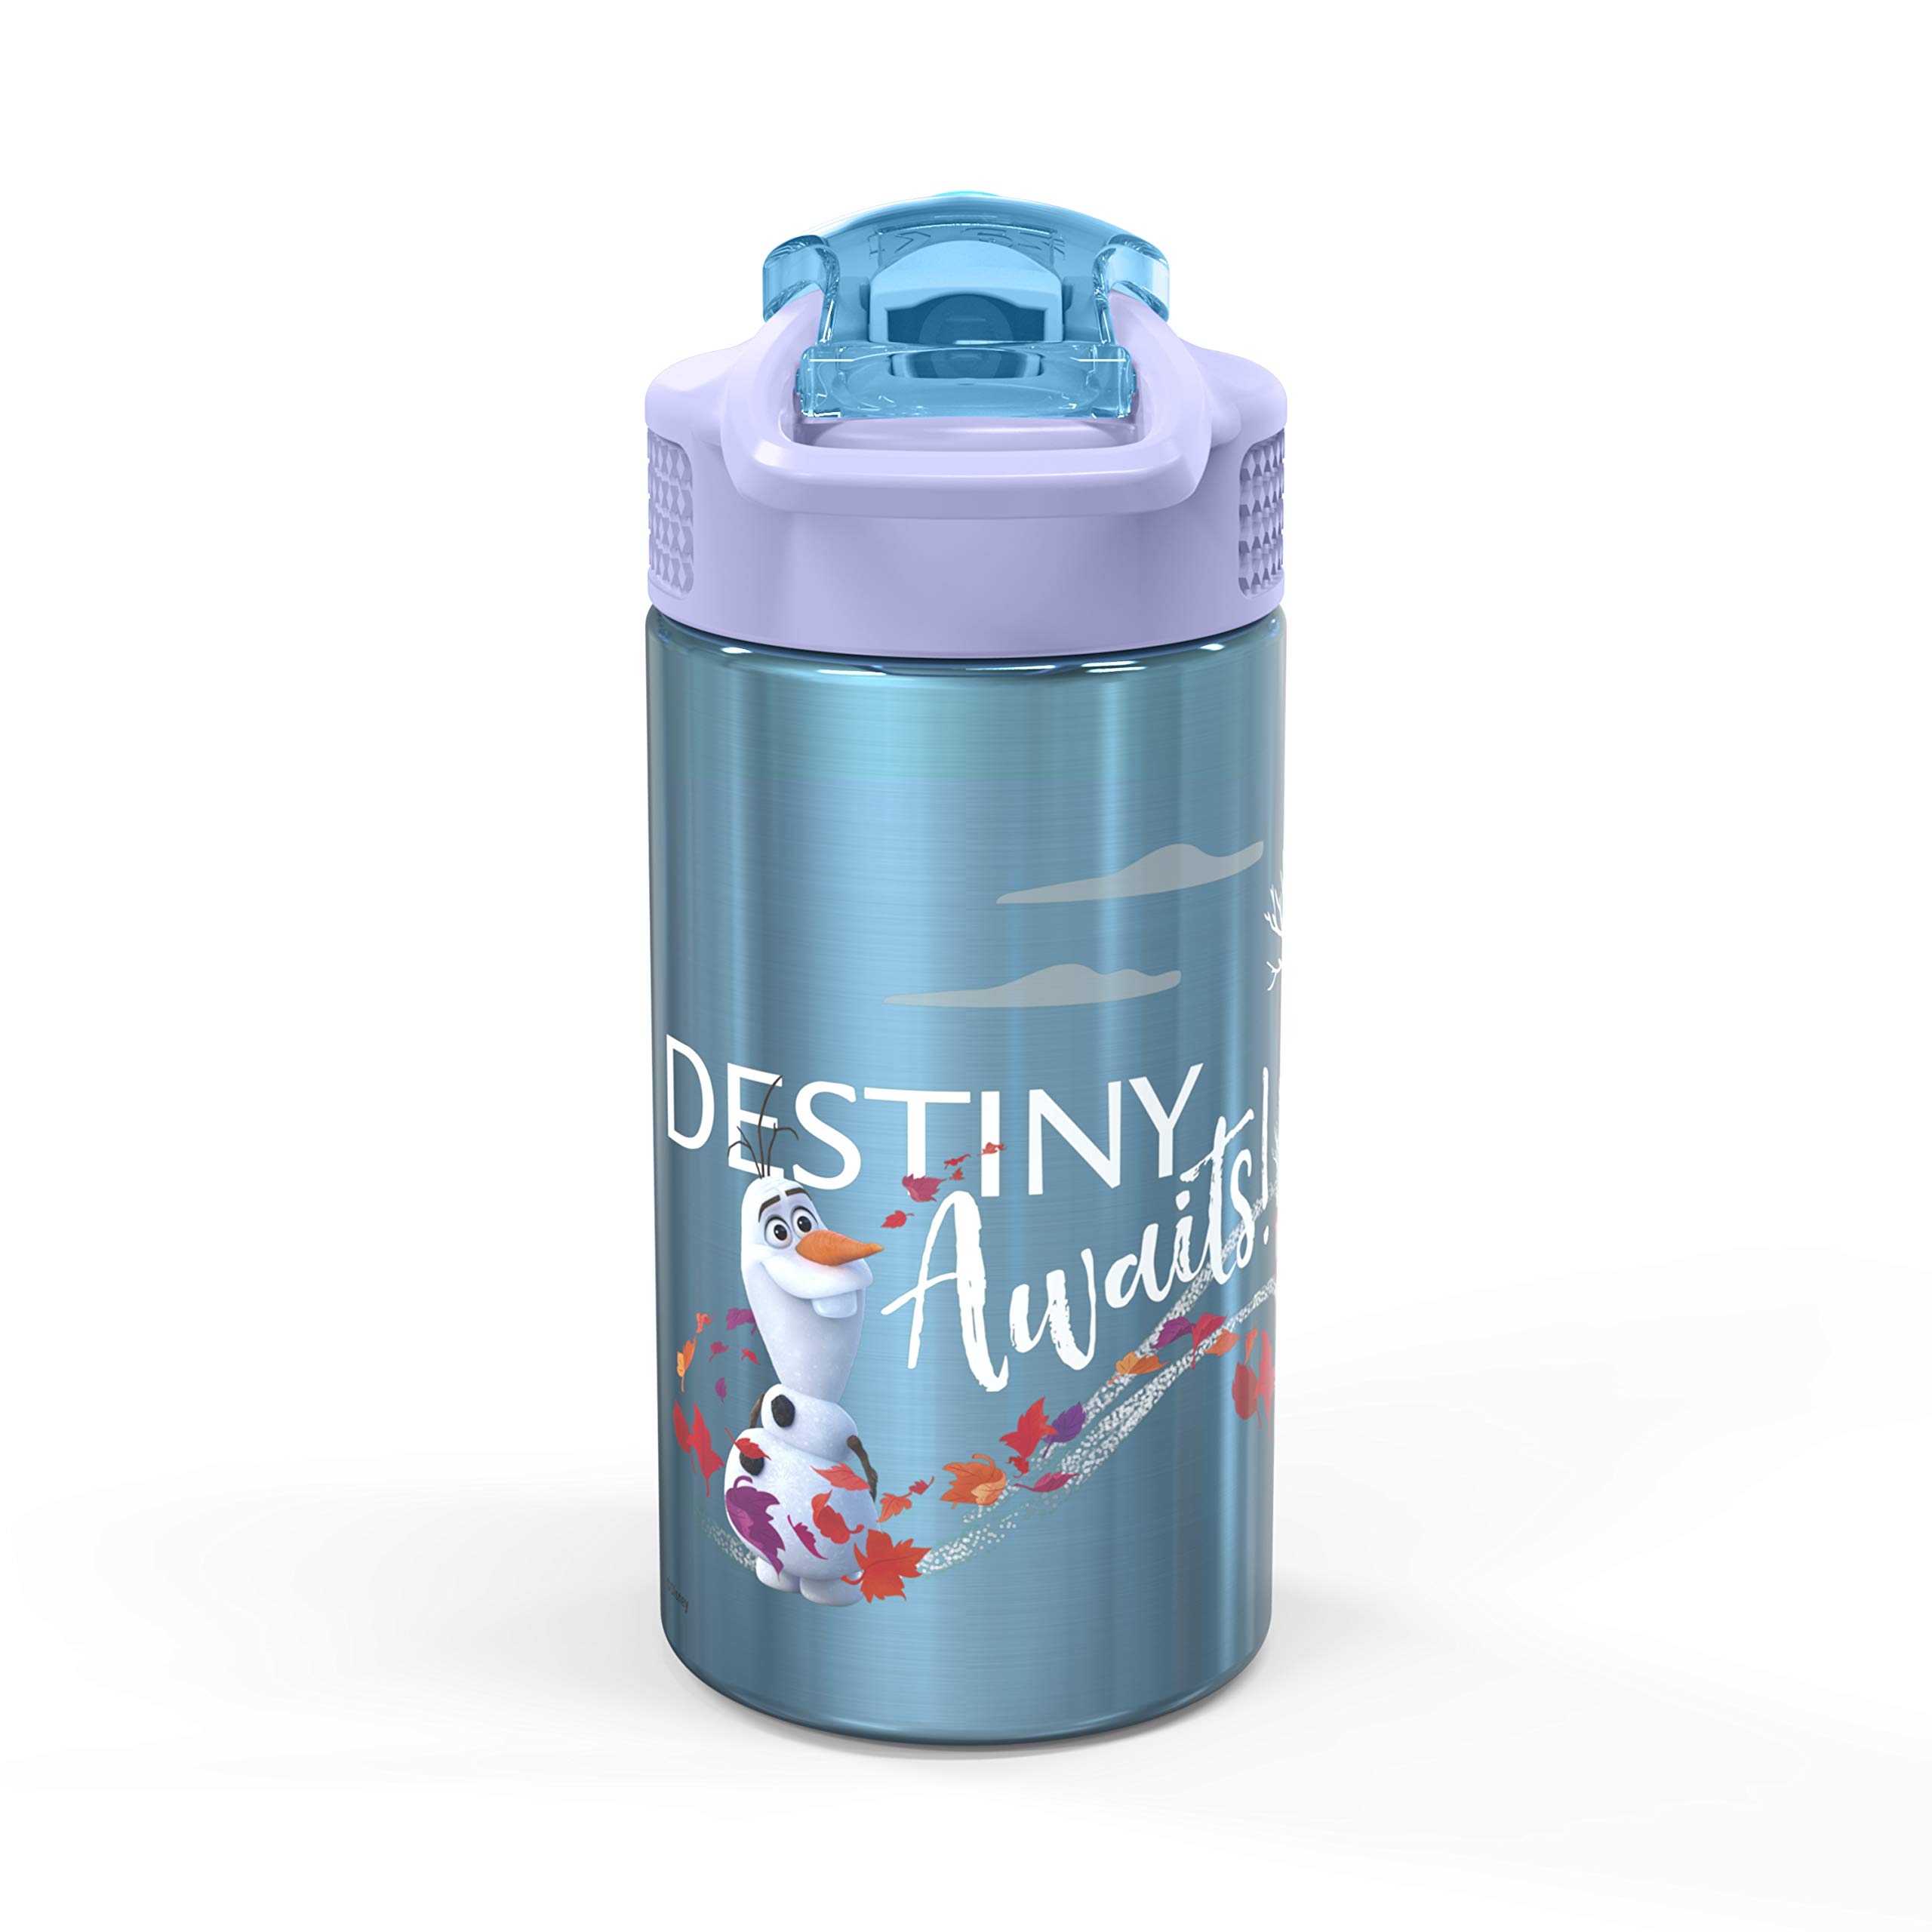 Zak Designs Frozen II 15.5oz Stainless Steel Kids Water Bottle with Flip-up Straw Spout - BPA Free Durable Design, (Elsa And Anna) (FRZA-S730-C)